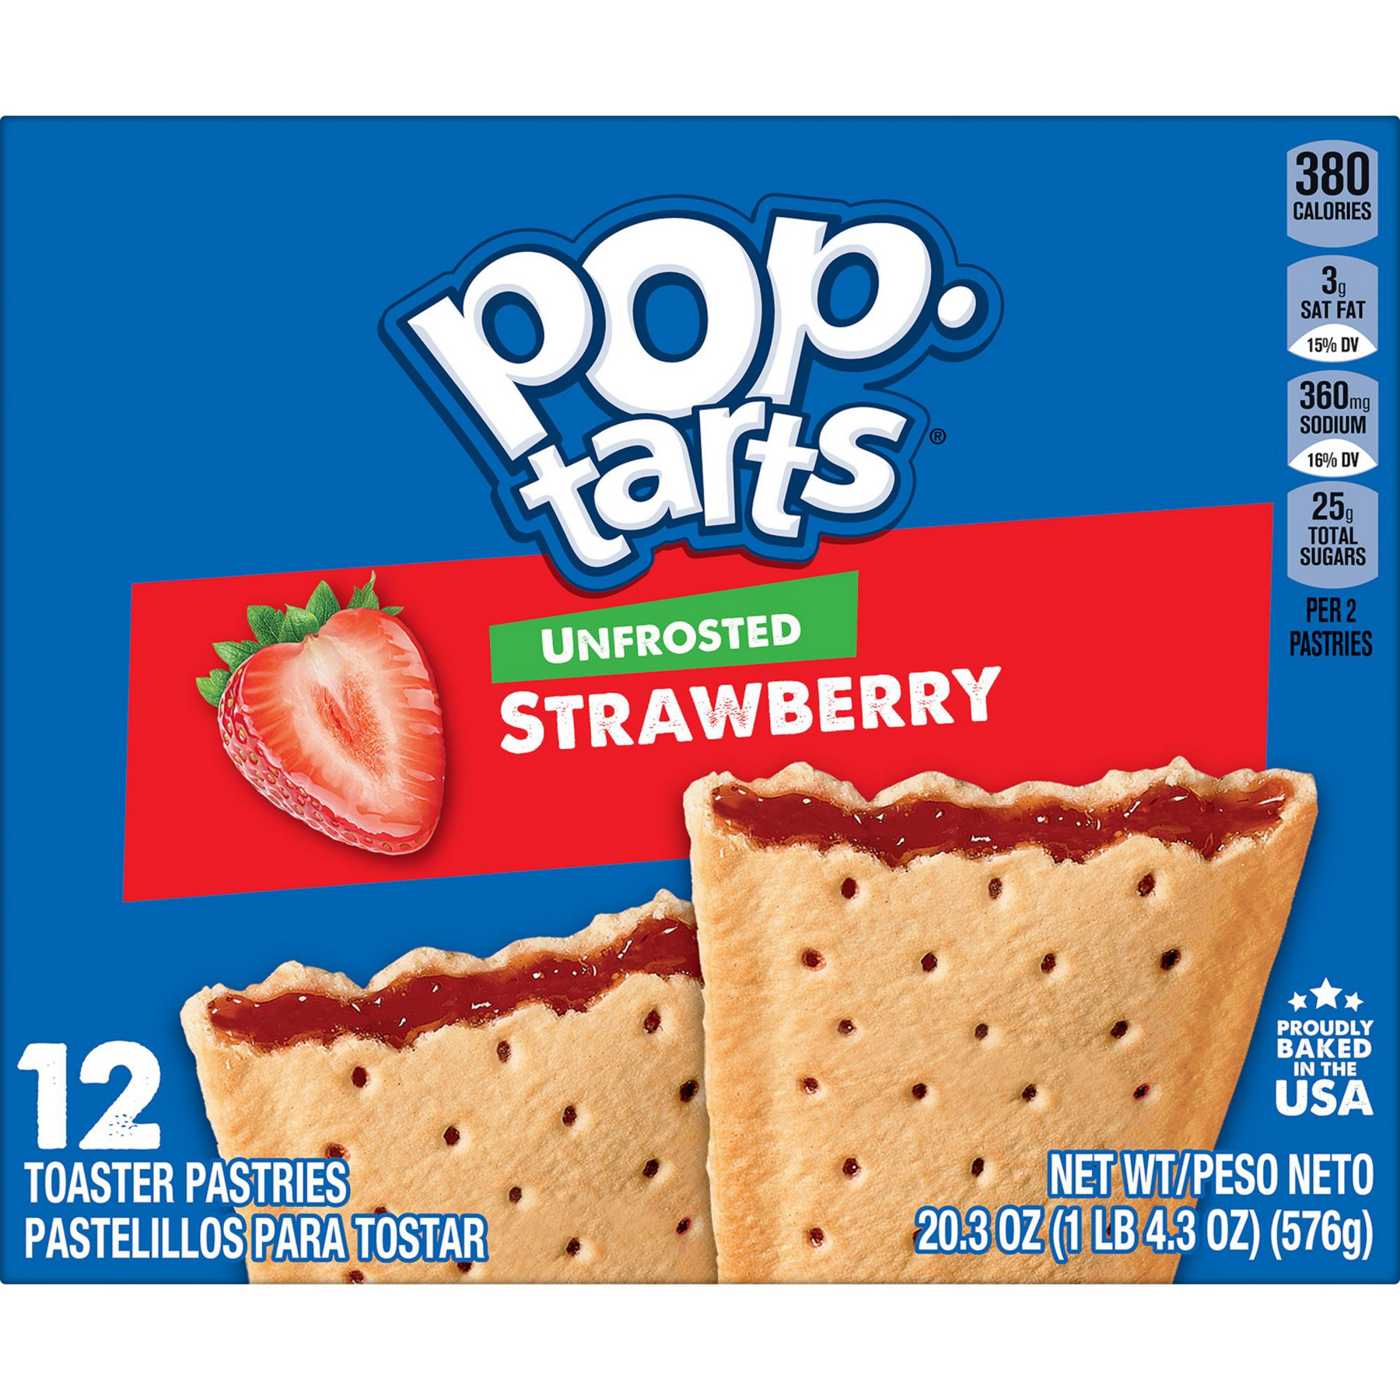 Pop-Tarts Unfrosted Strawberry Toaster Pastries; image 11 of 11